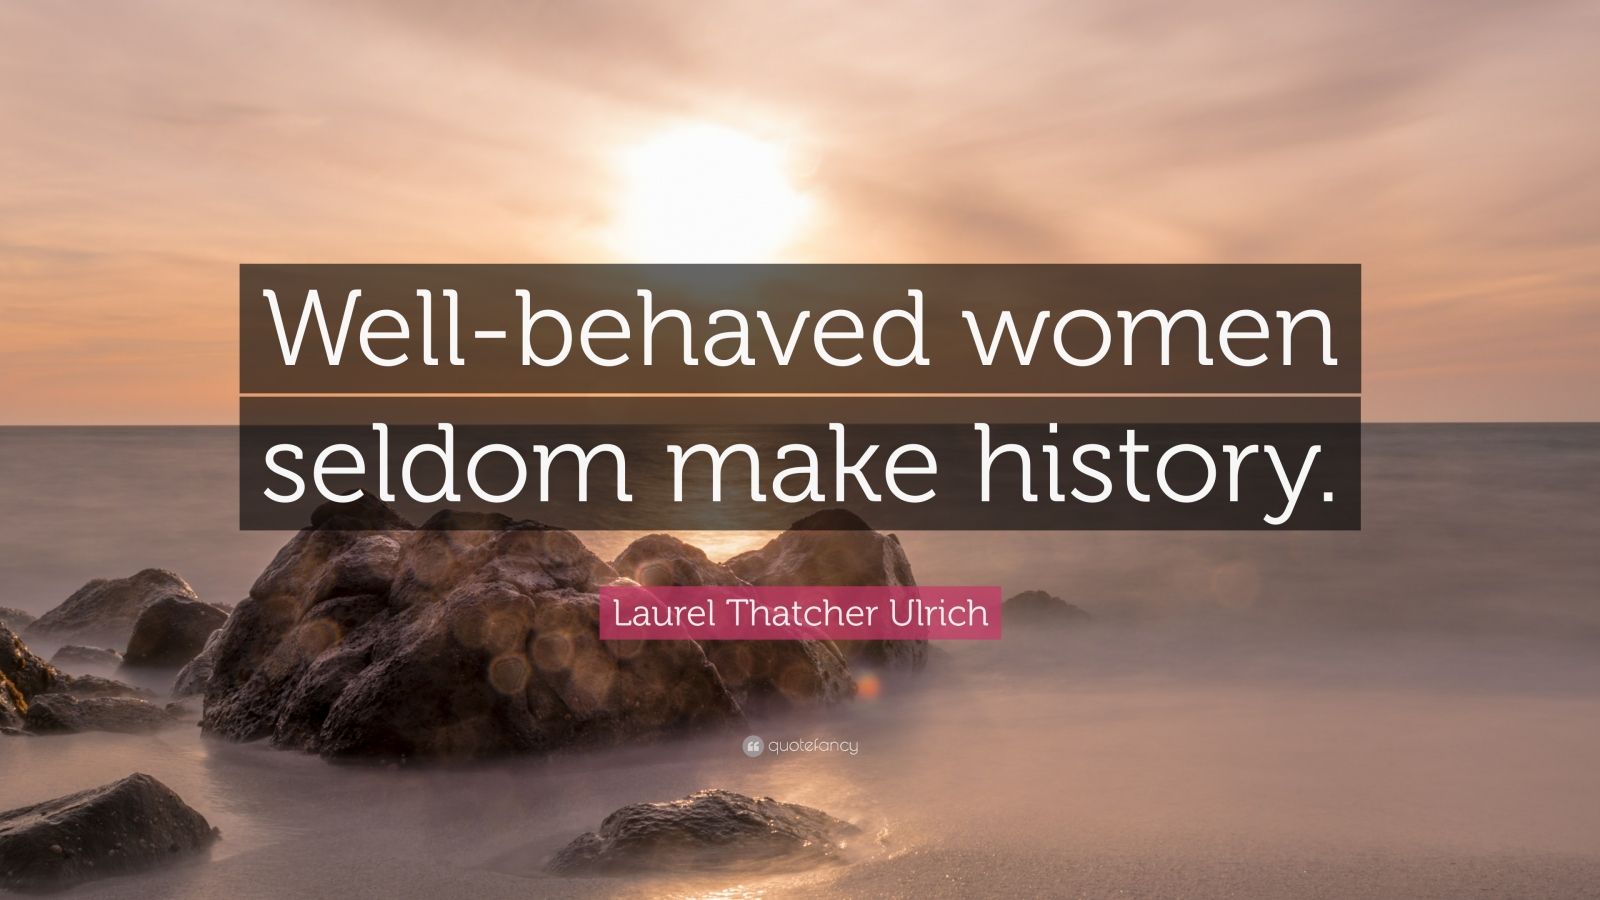 women rarely make history quote